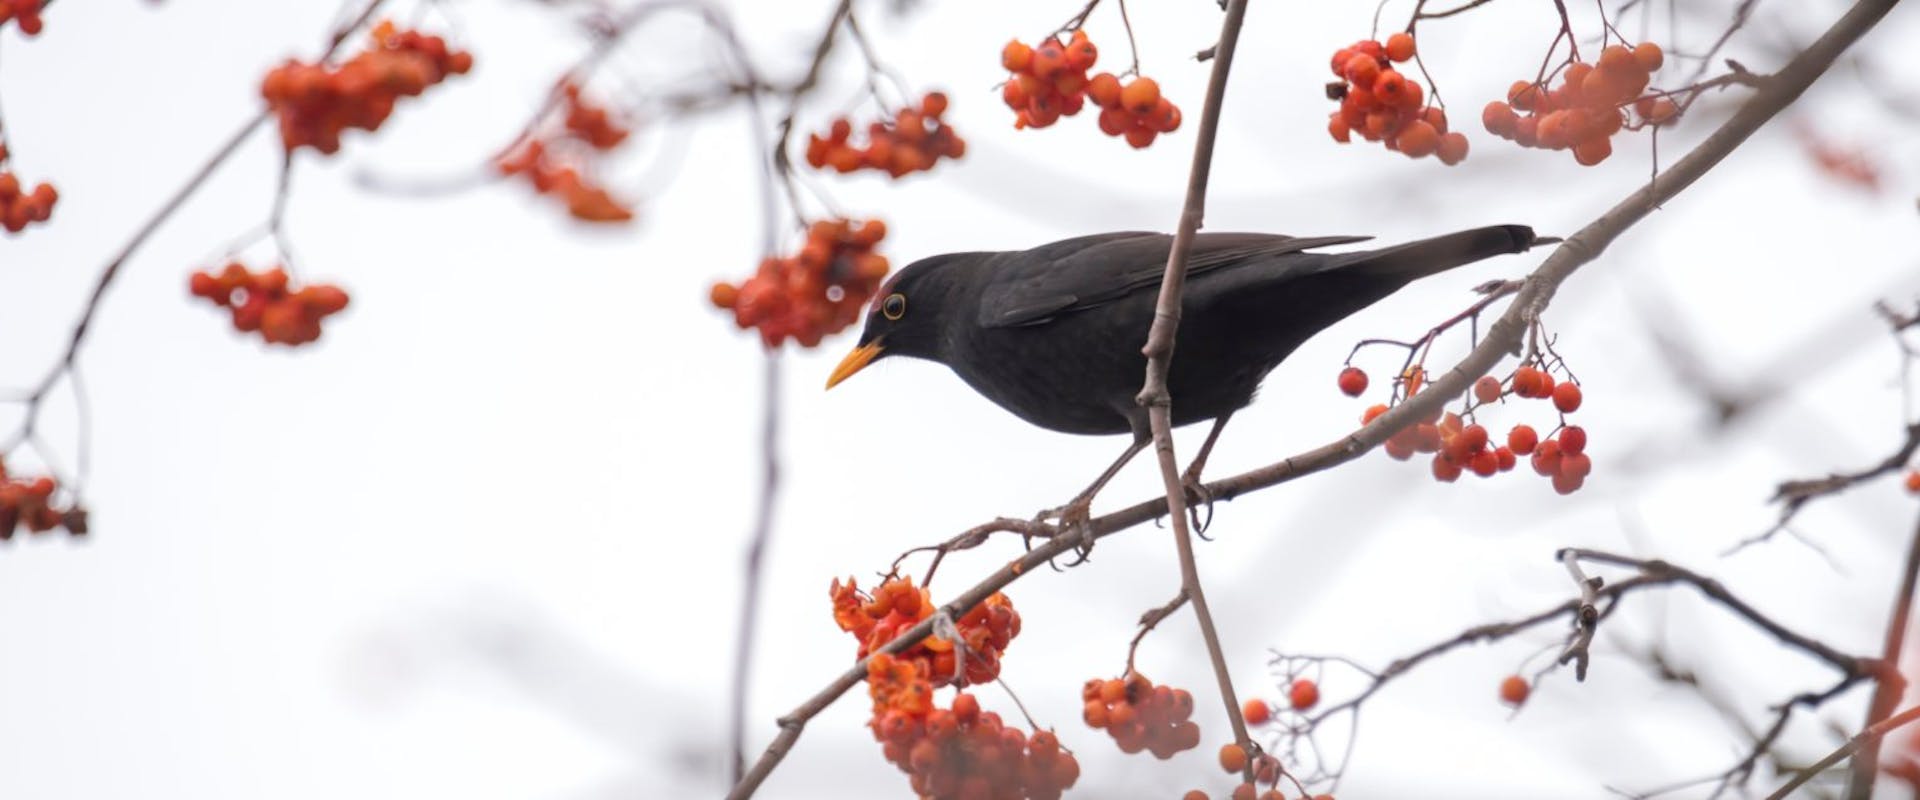 A bird sitting on a Rowan tree in winter with red berries.